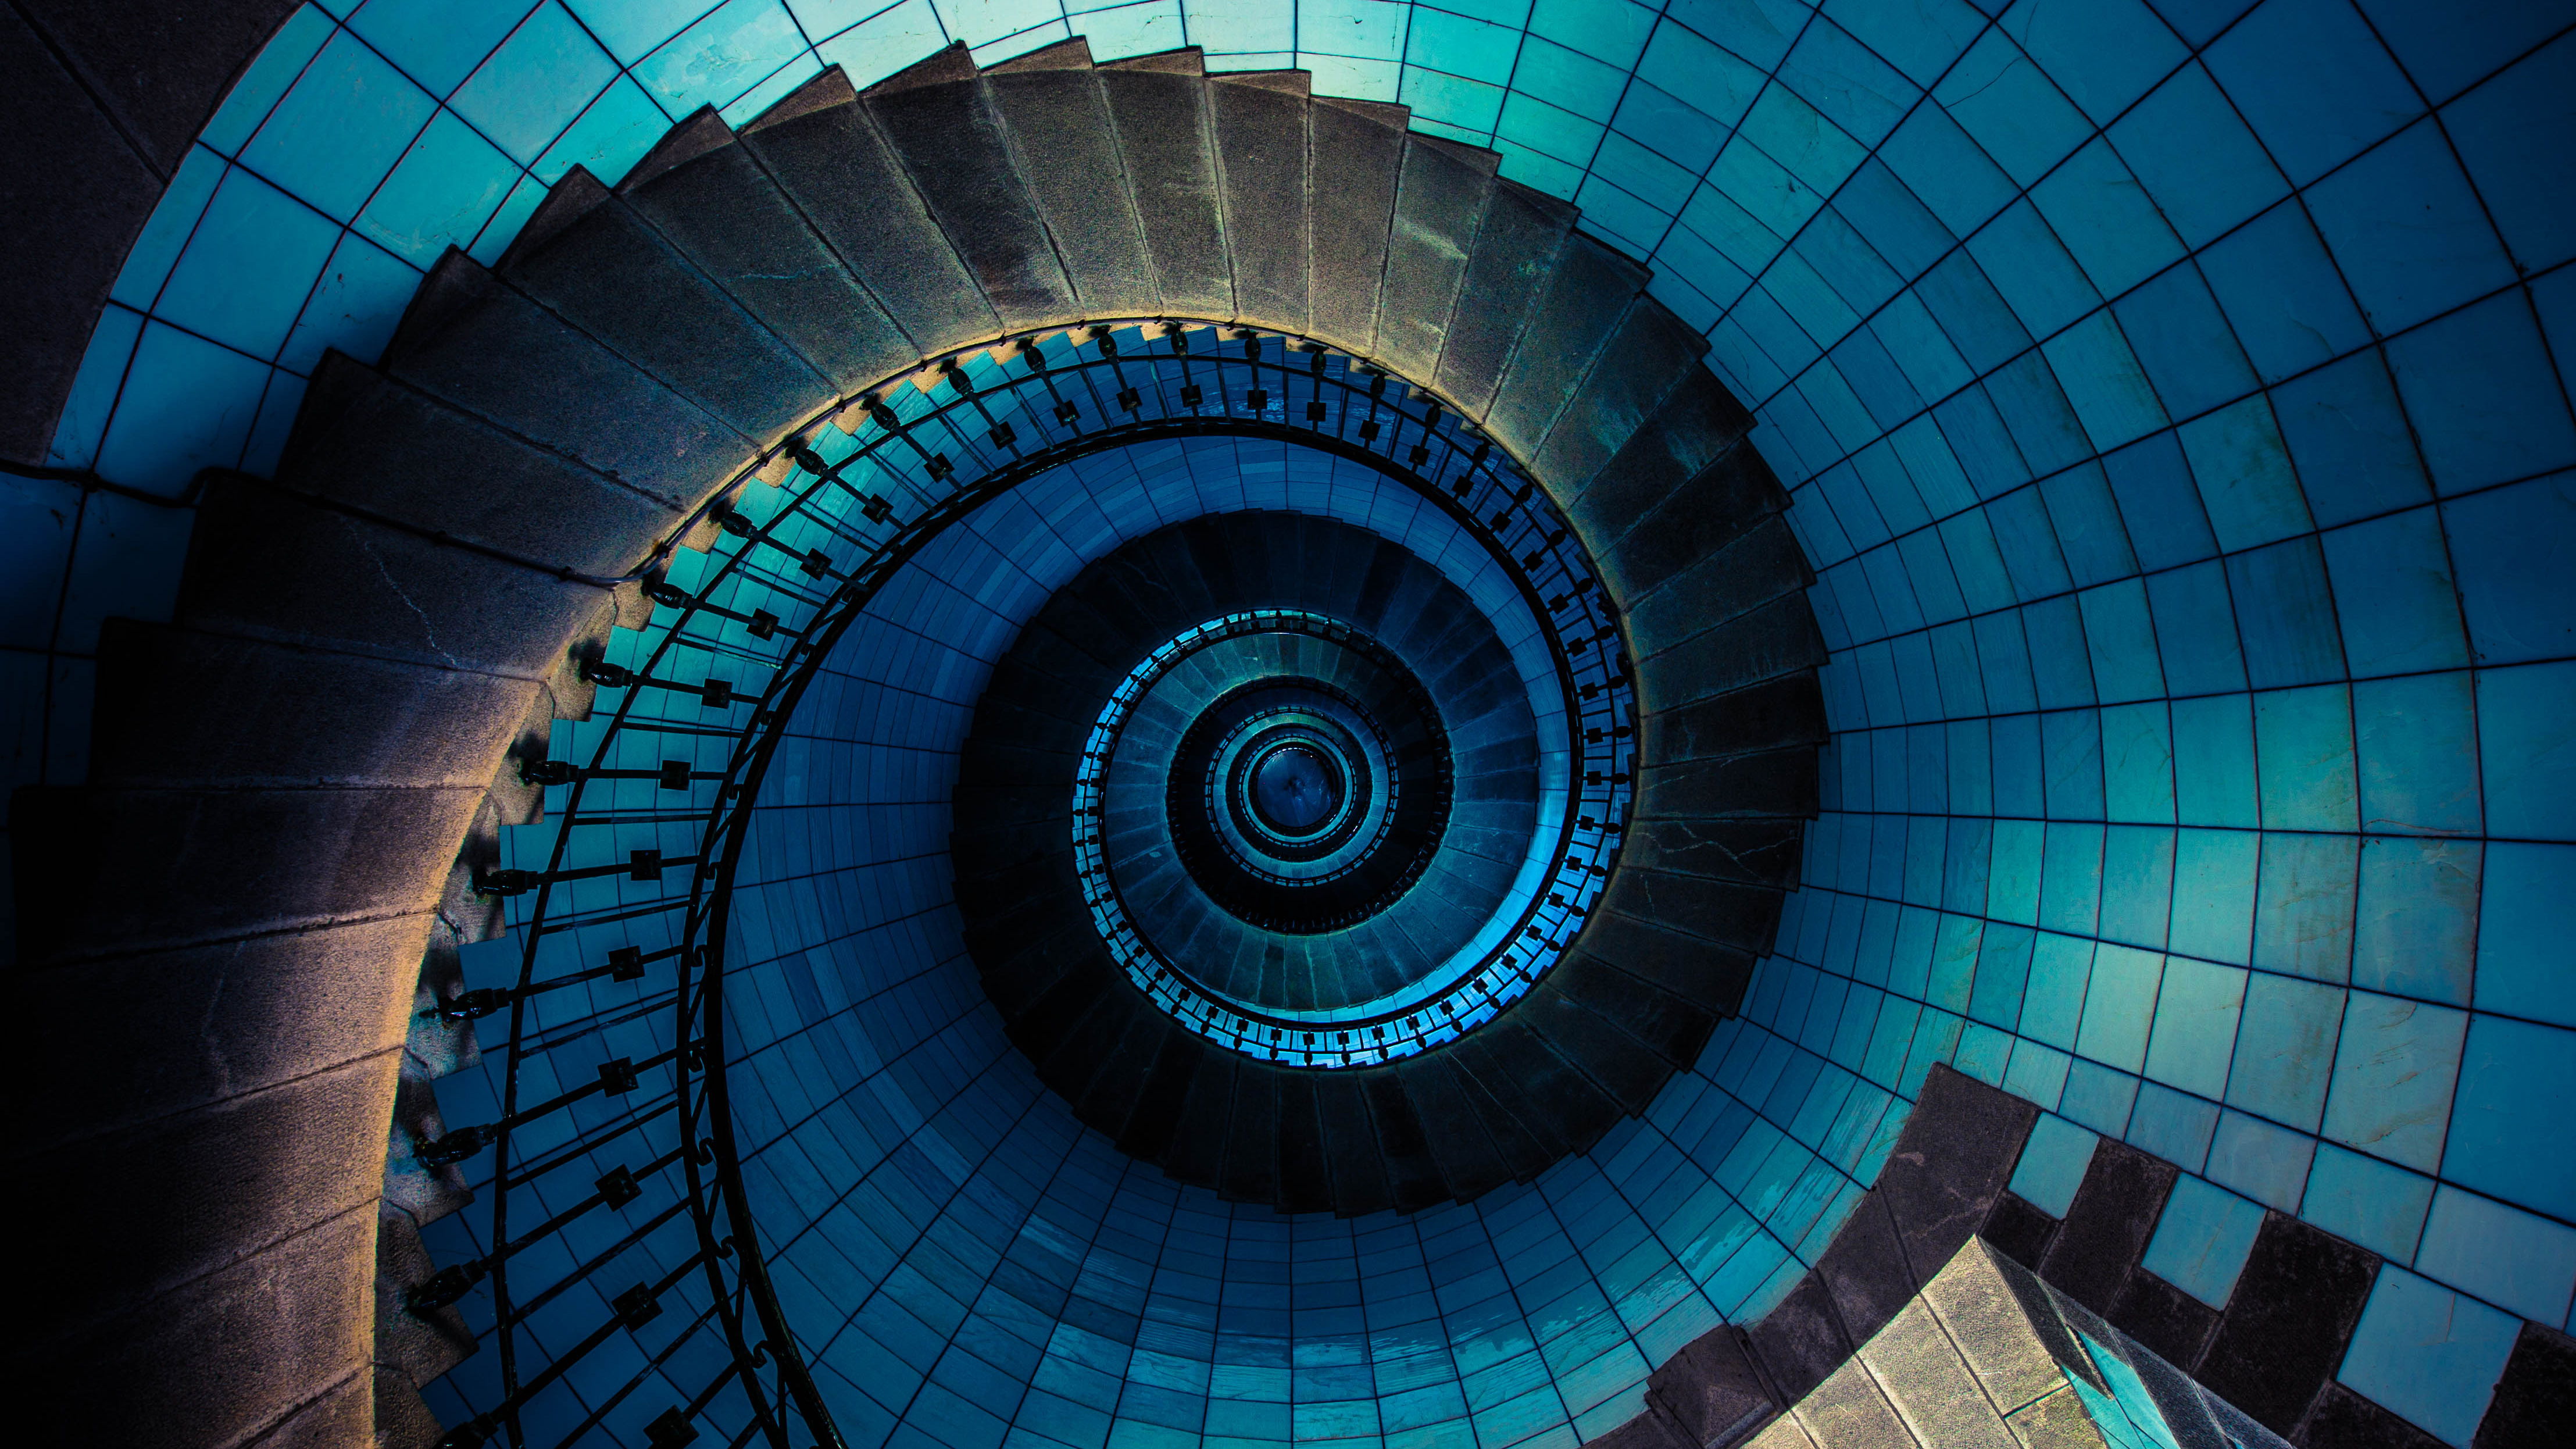 Spiral staircase 4K Wallpapers